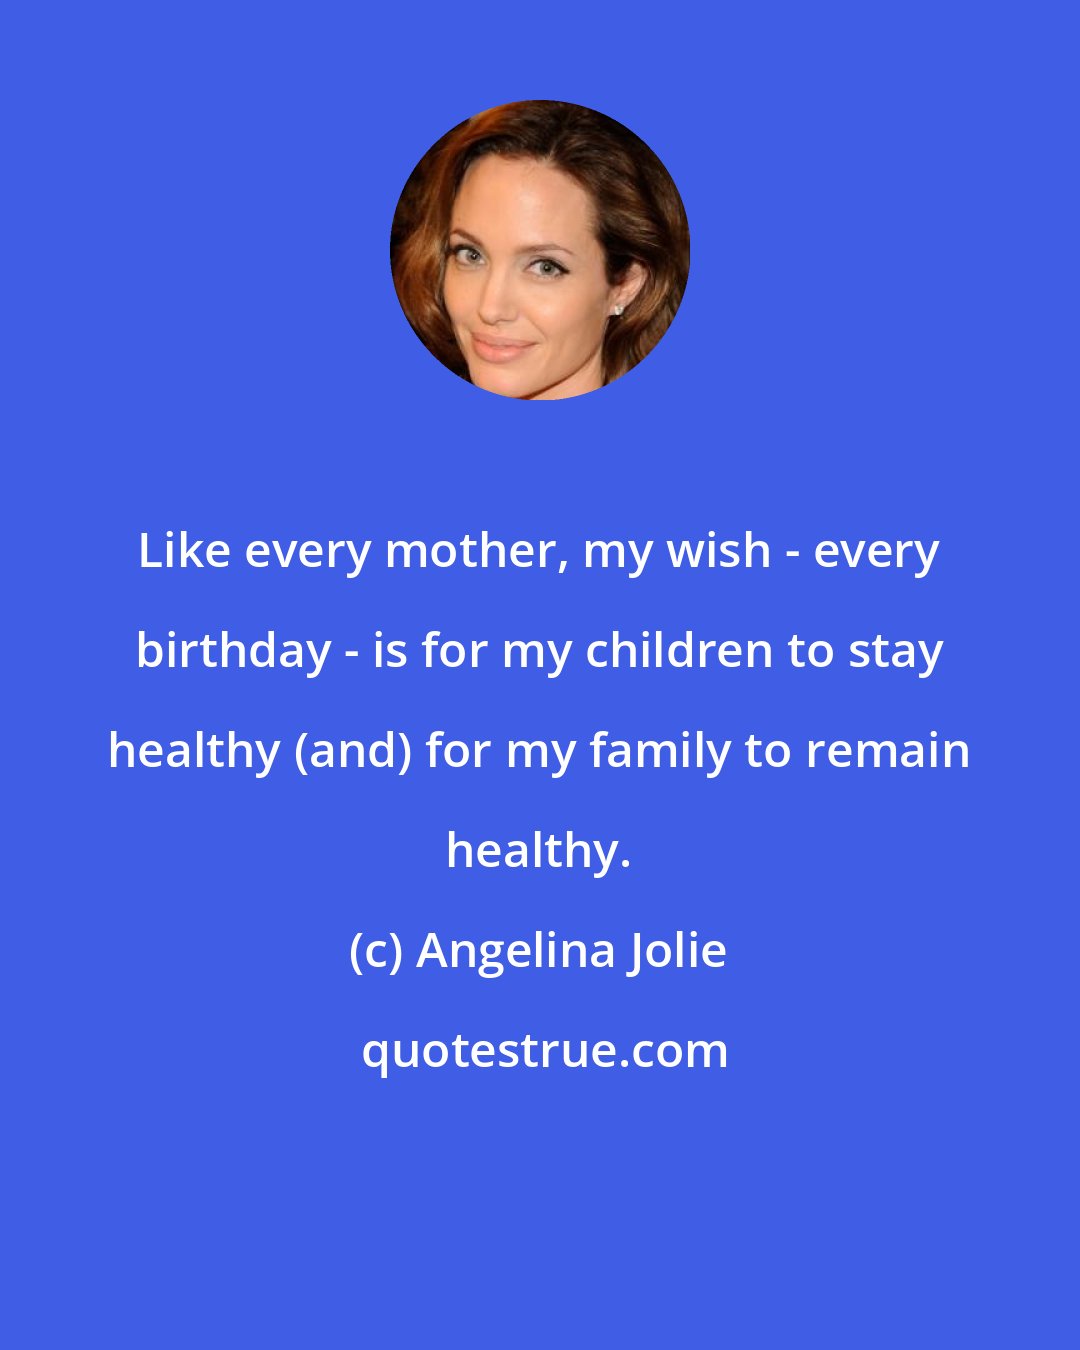 Angelina Jolie: Like every mother, my wish - every birthday - is for my children to stay healthy (and) for my family to remain healthy.